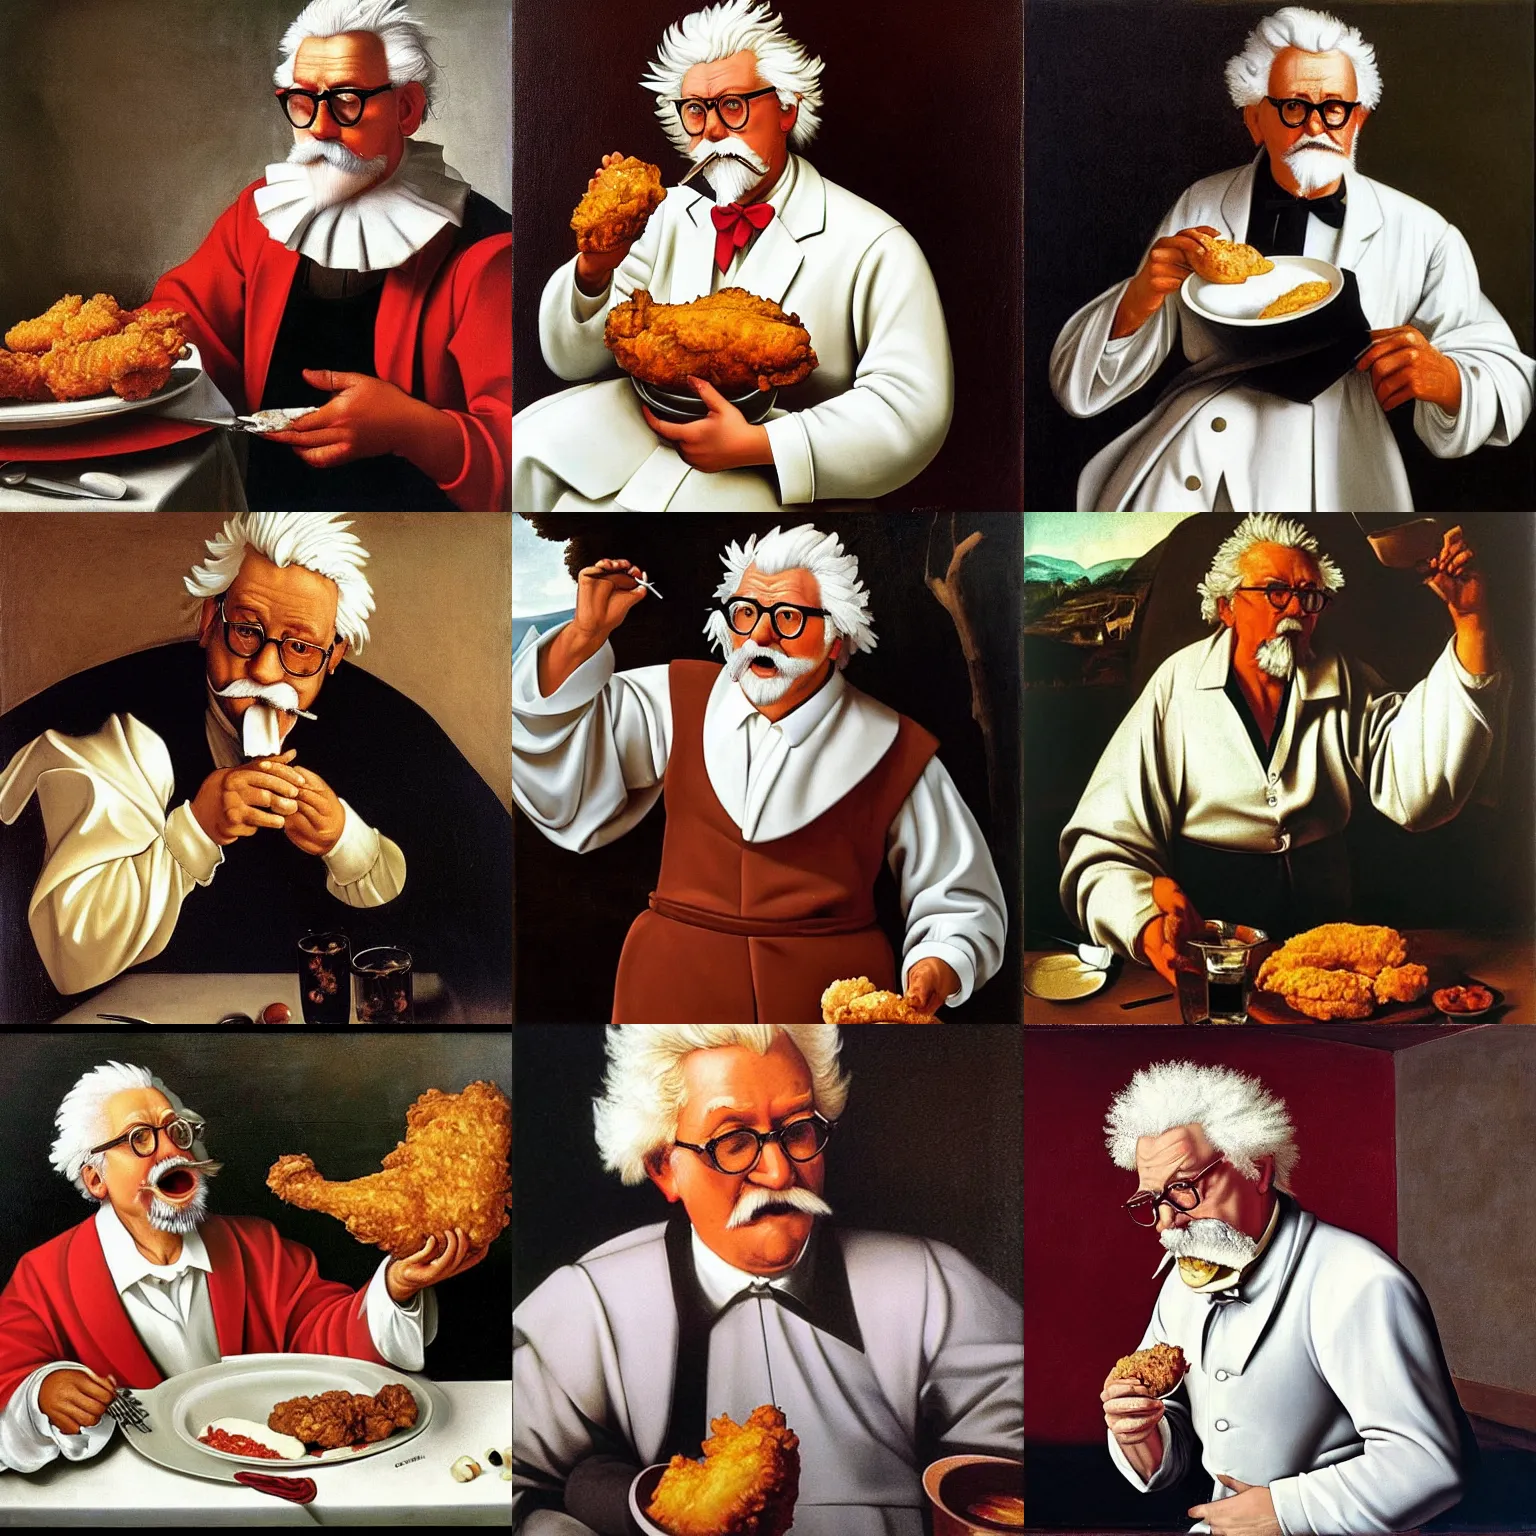 Prompt: colonel sanders eating fried chicken. painted by caravaggio